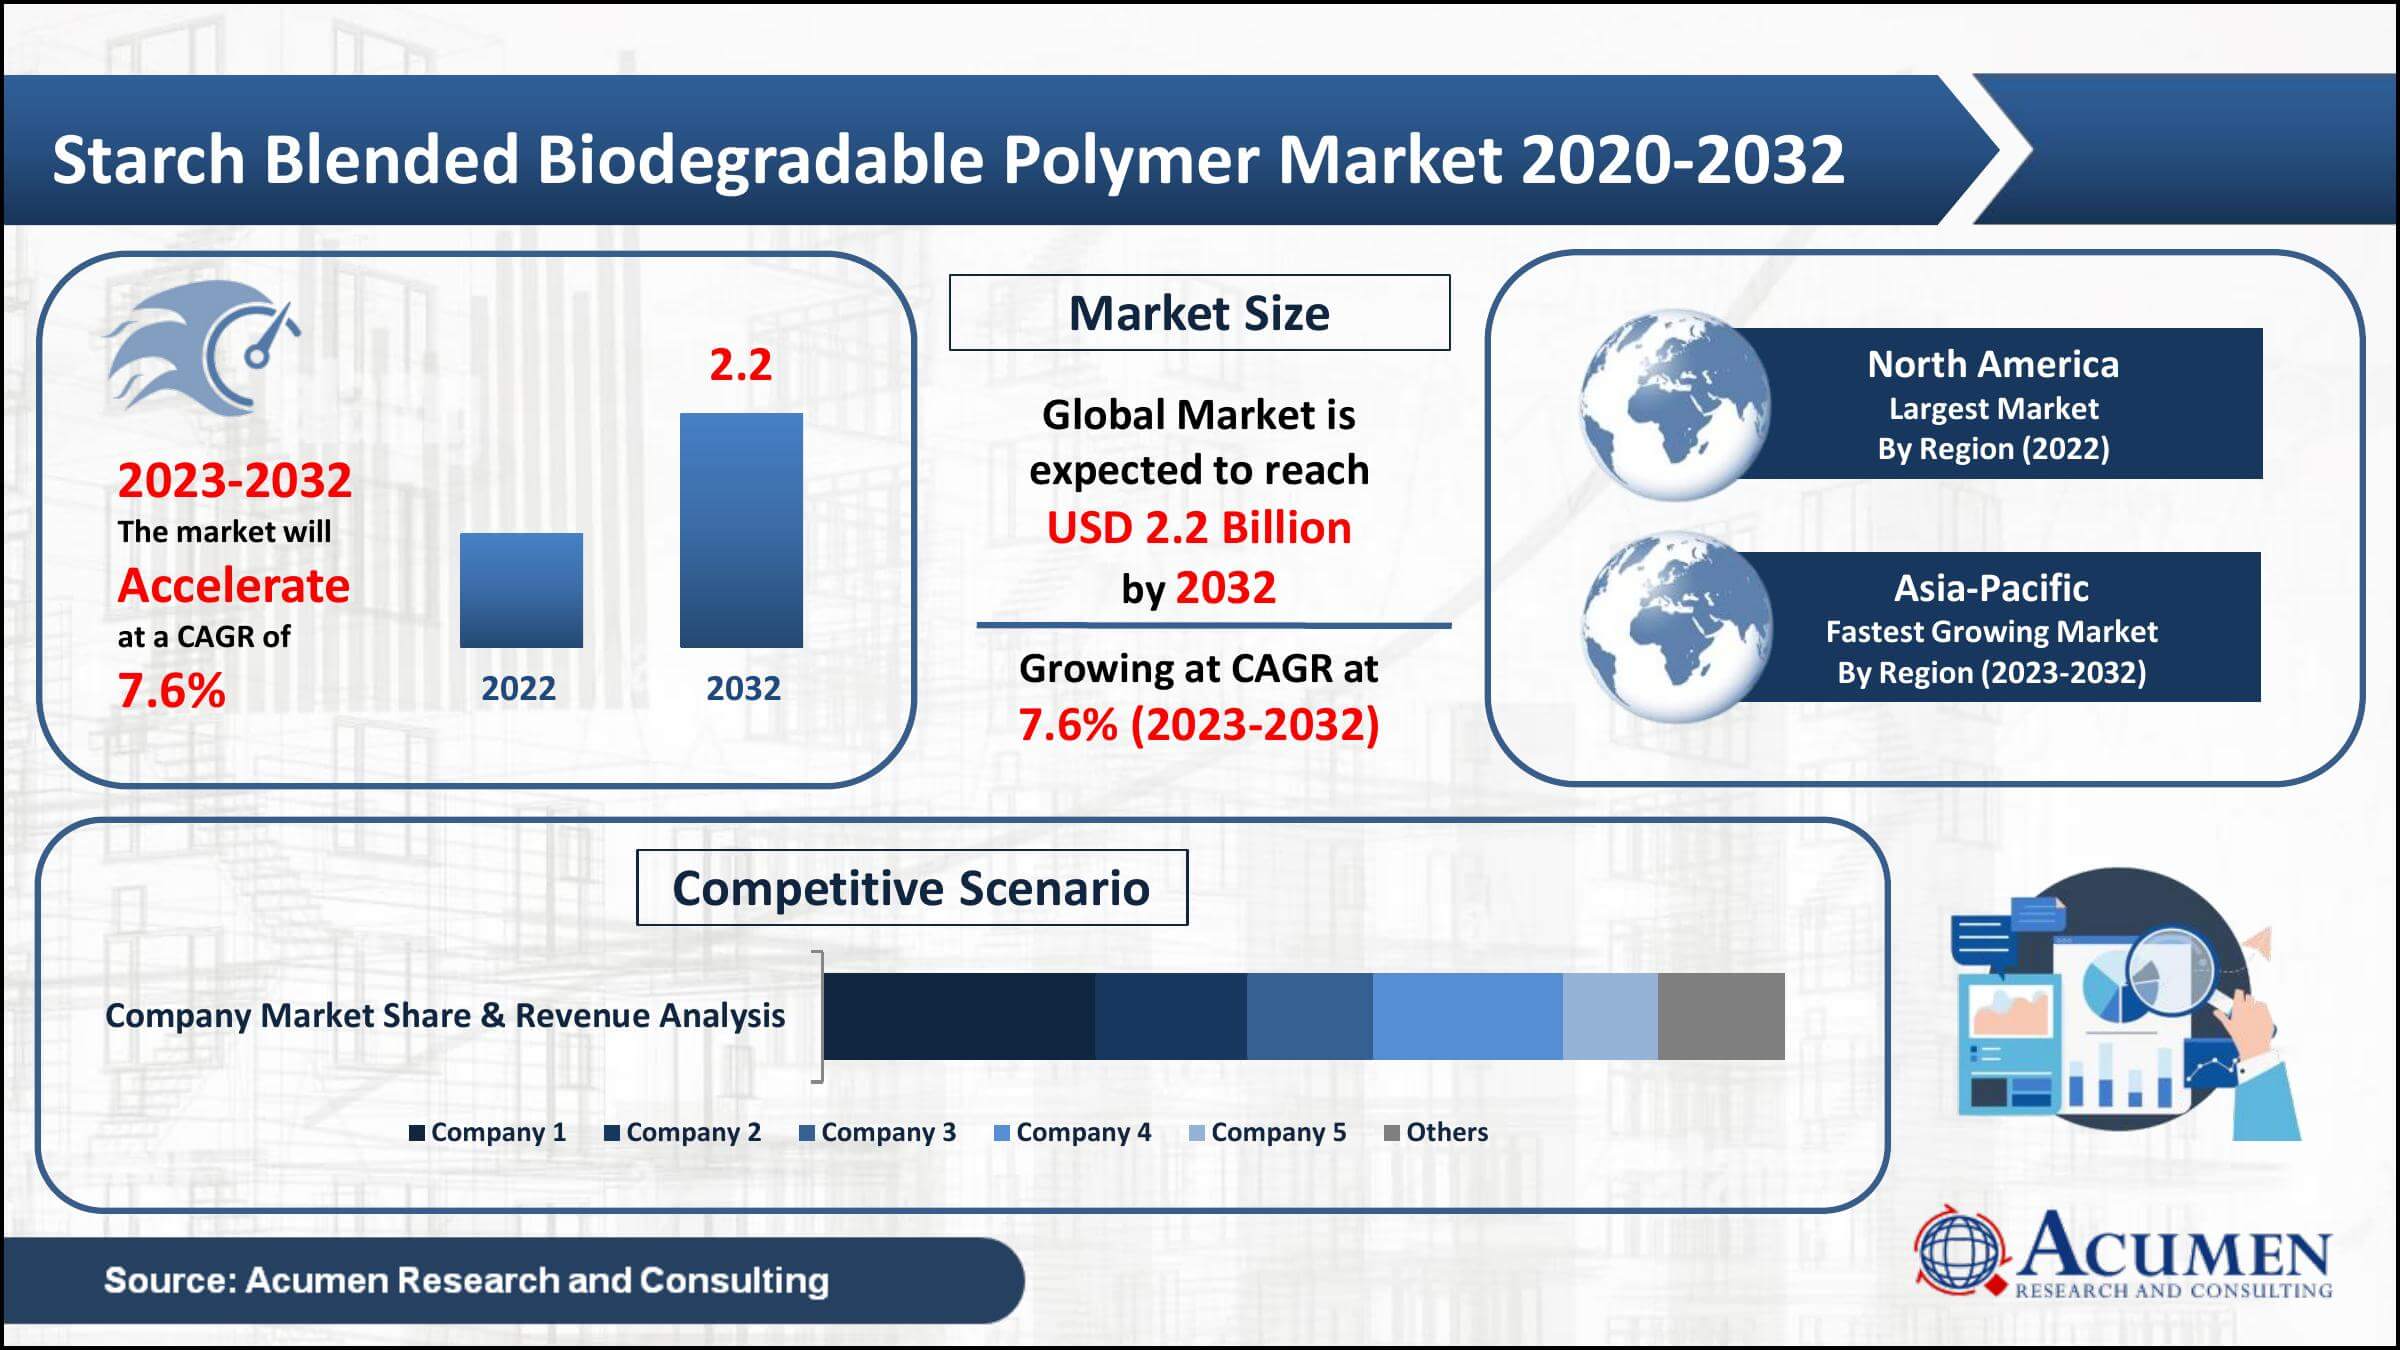 Starch Blended Biodegradable Polymer Market Growth